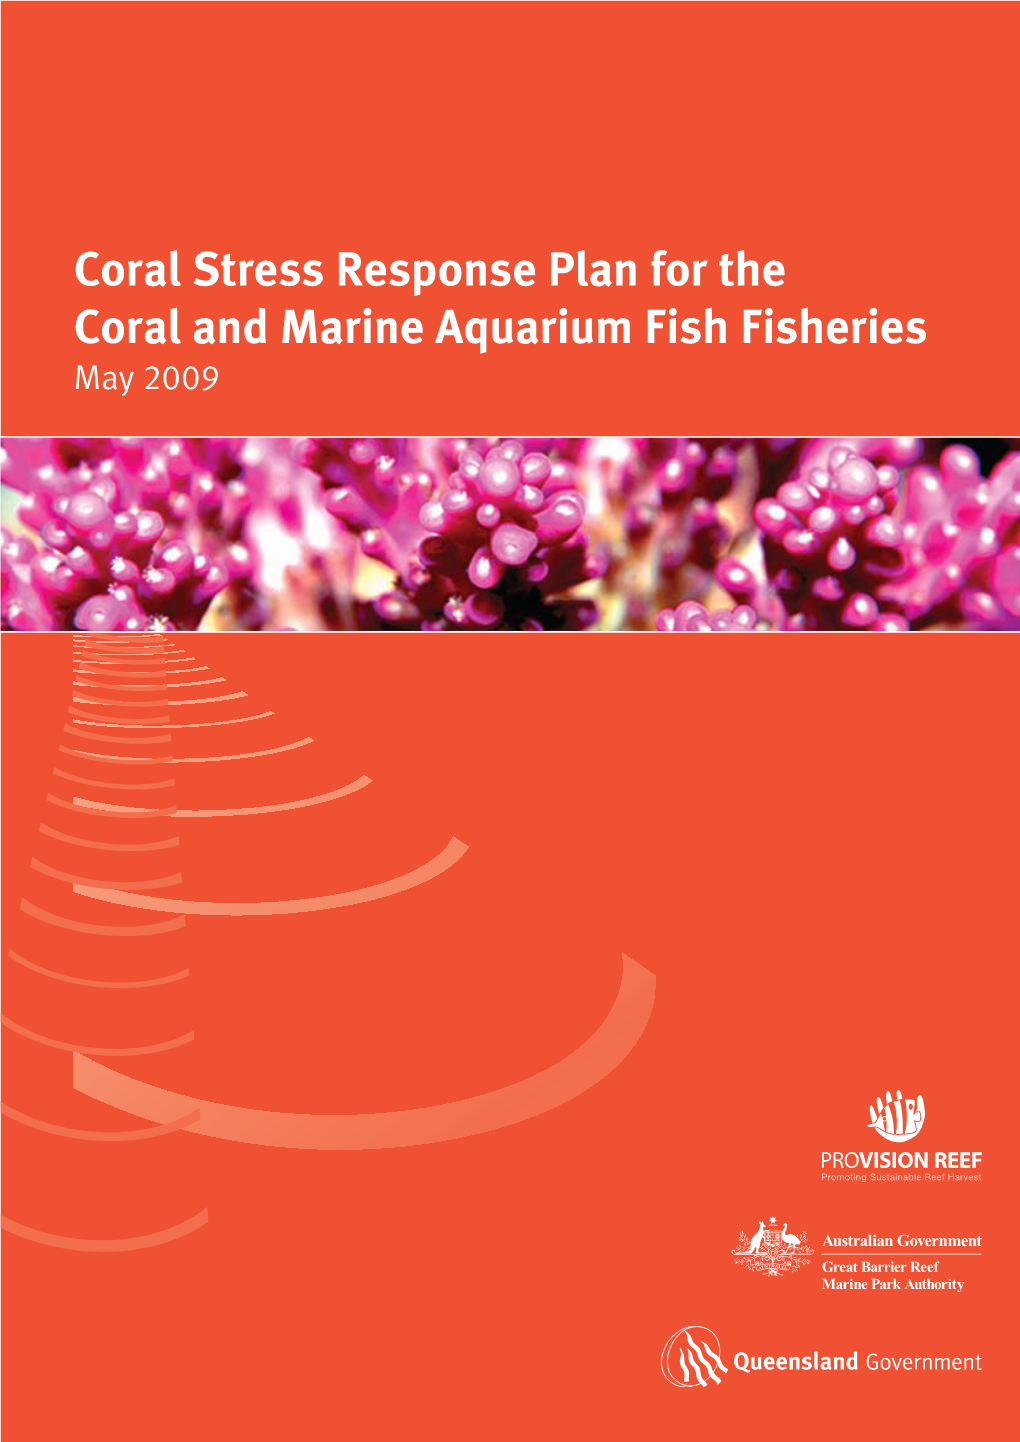 Coral Stress Response Plan for the Coral and Marine Aquarium Fish Fisheries